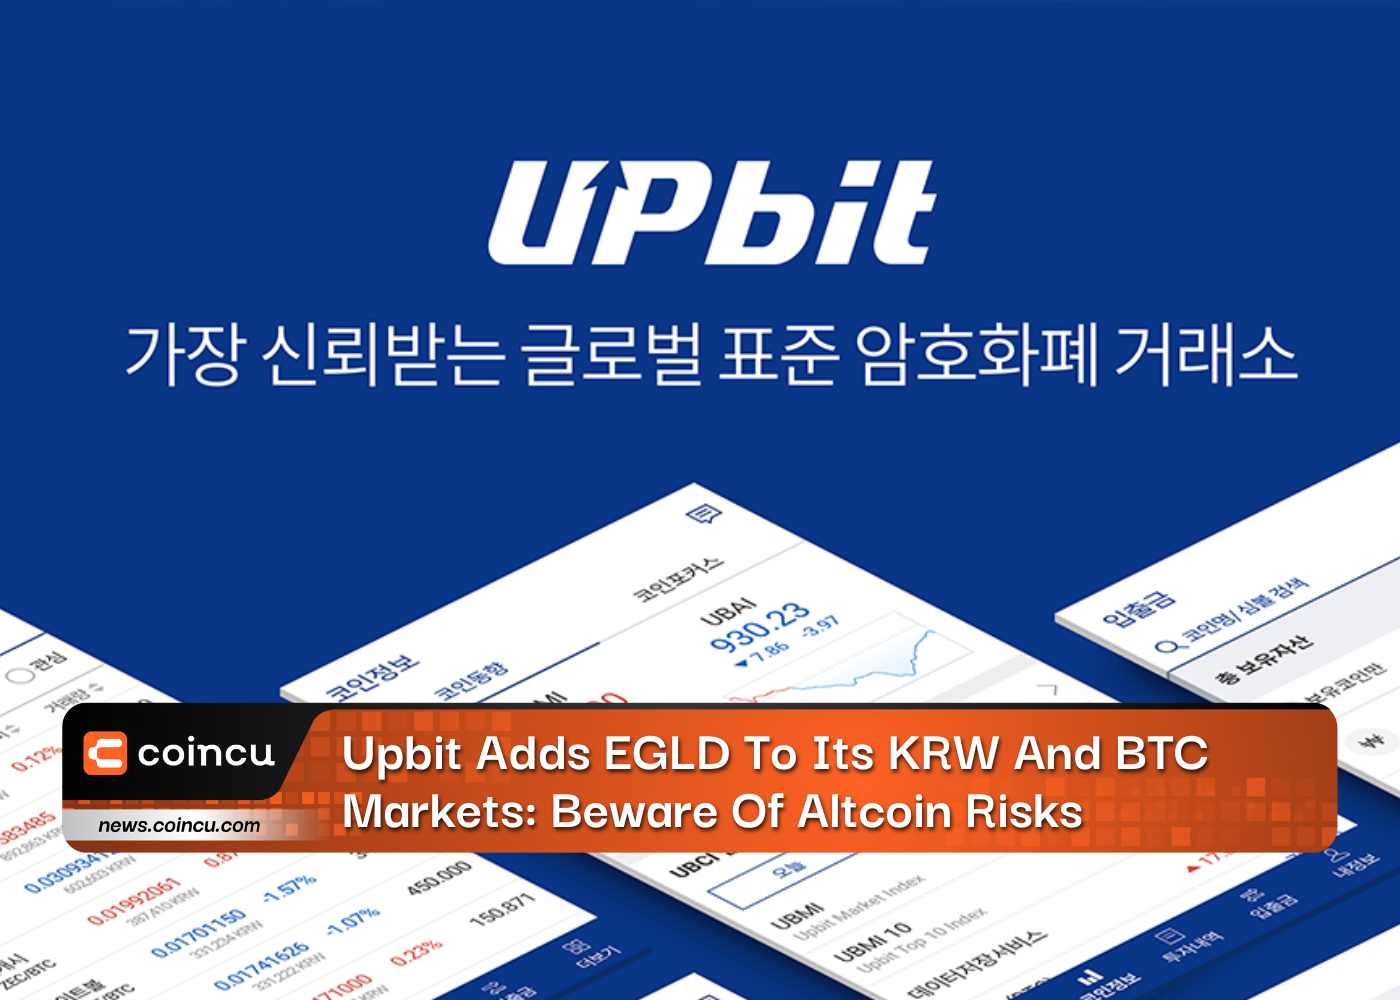 Upbit Adds EGLD To Its KRW And BTC Markets: Beware Of Altcoin Risks